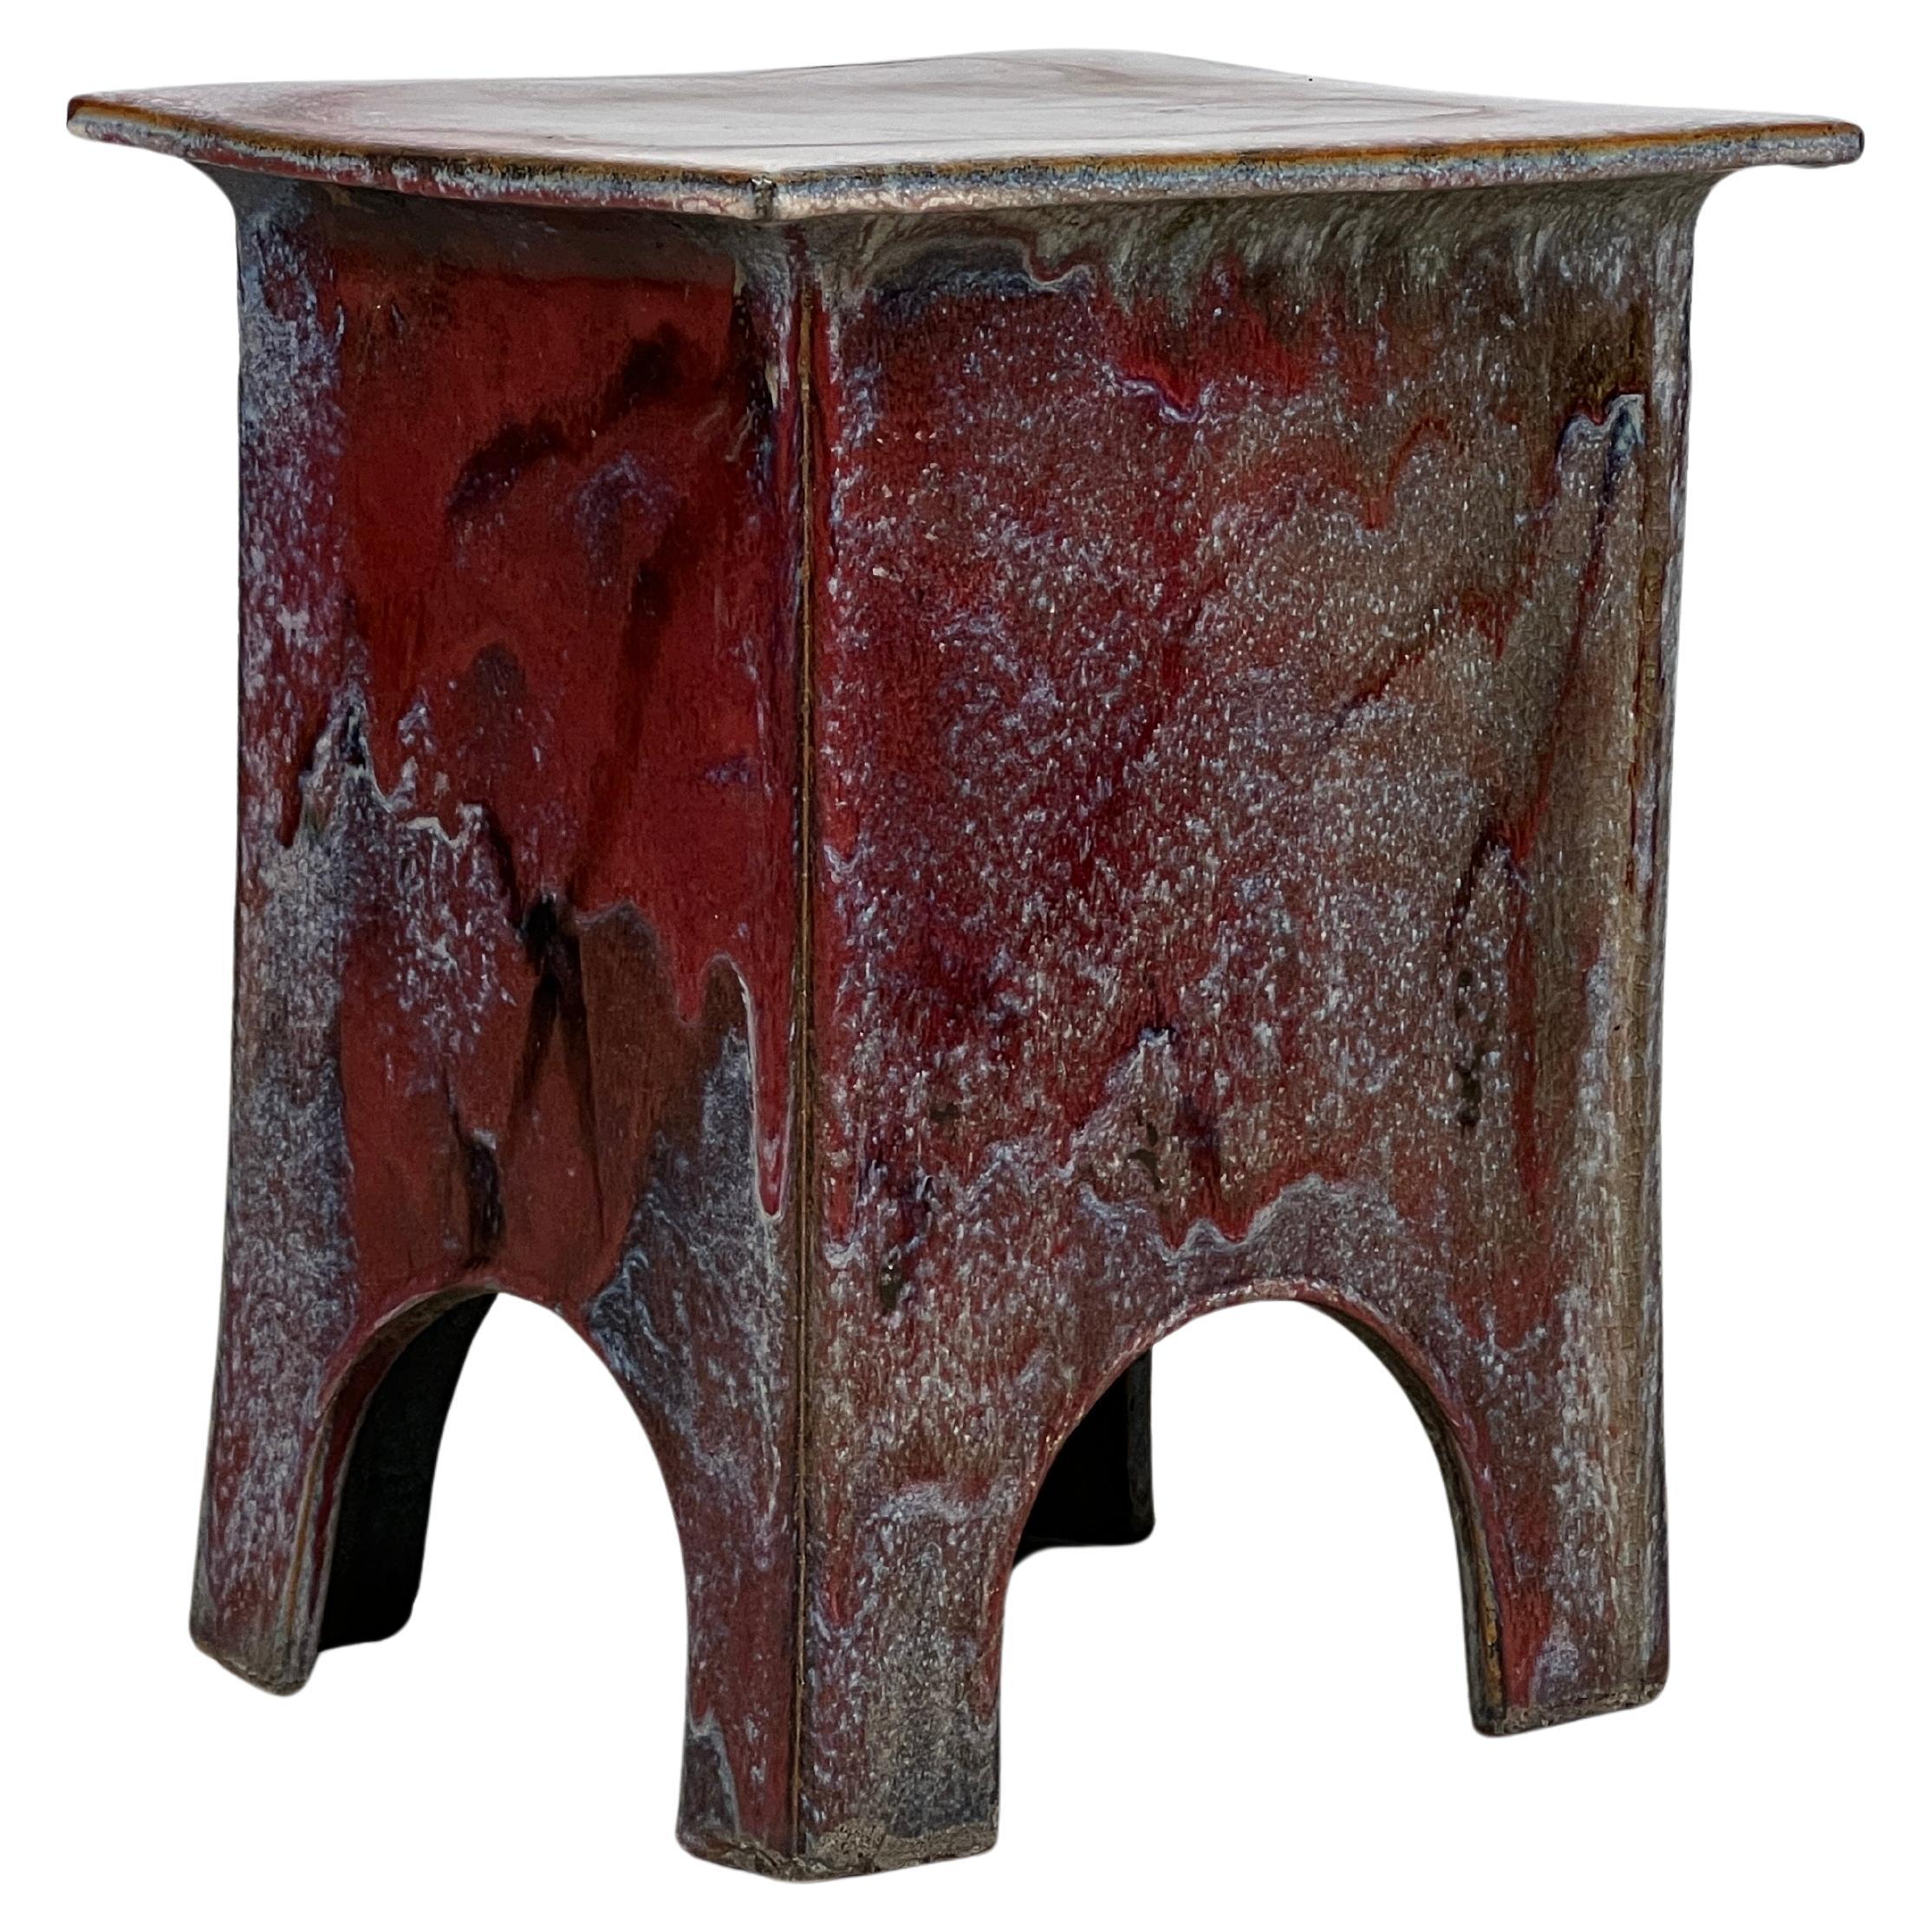 Eric O'Leary Ceramic Stool / Table For Sale